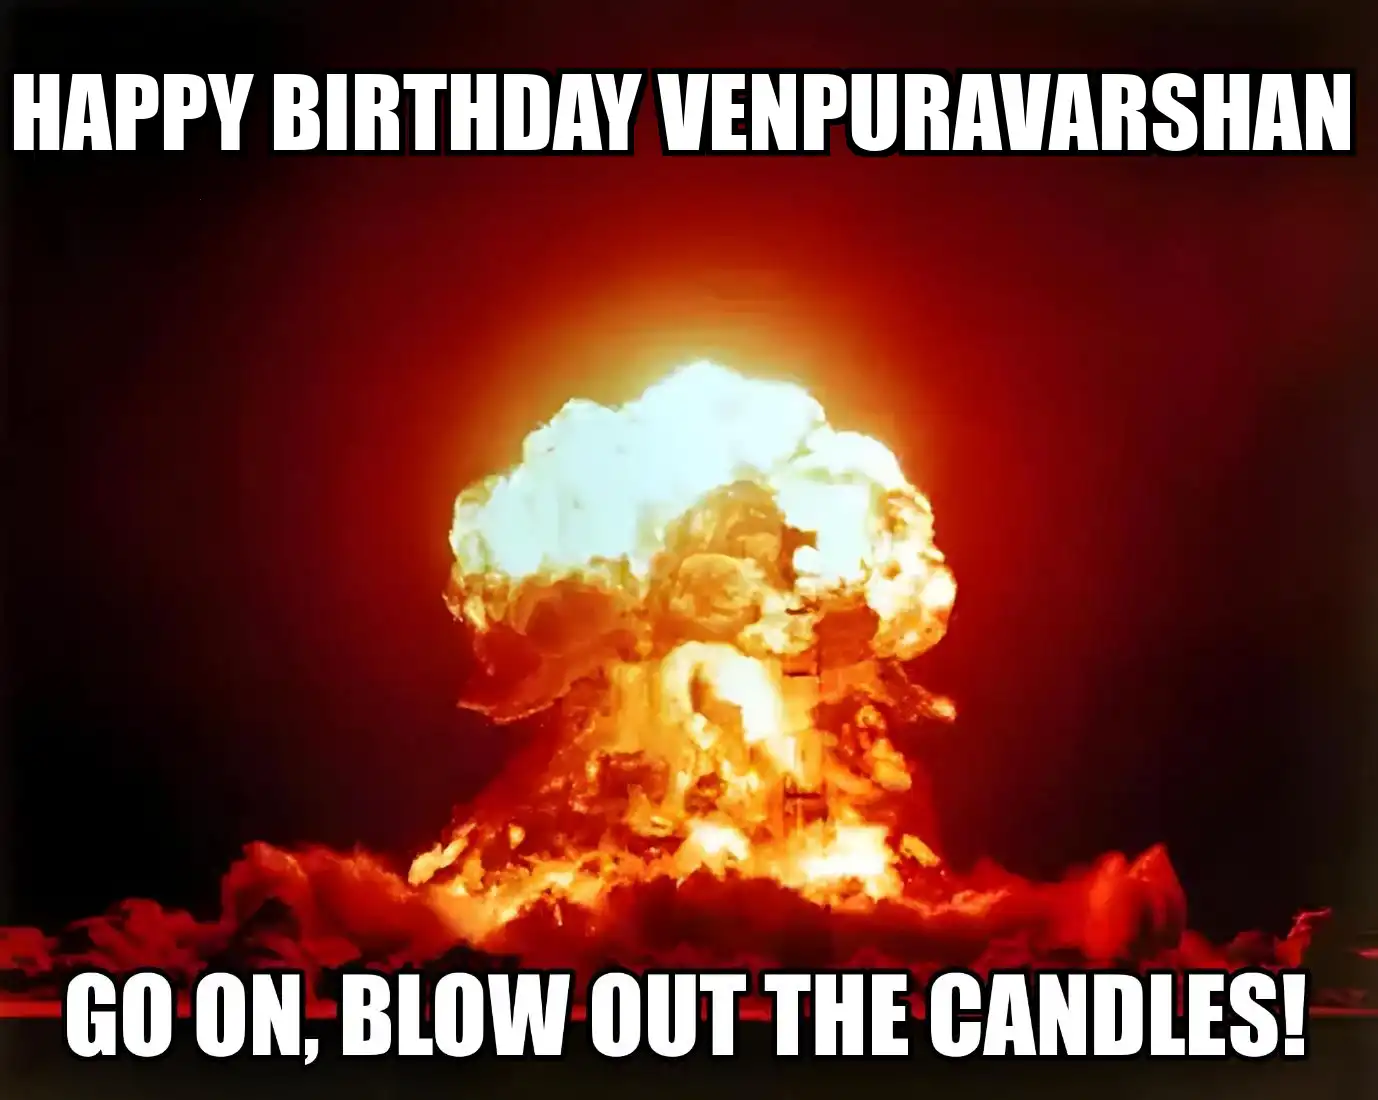 Happy Birthday Venpuravarshan Go On Blow Out The Candles Meme